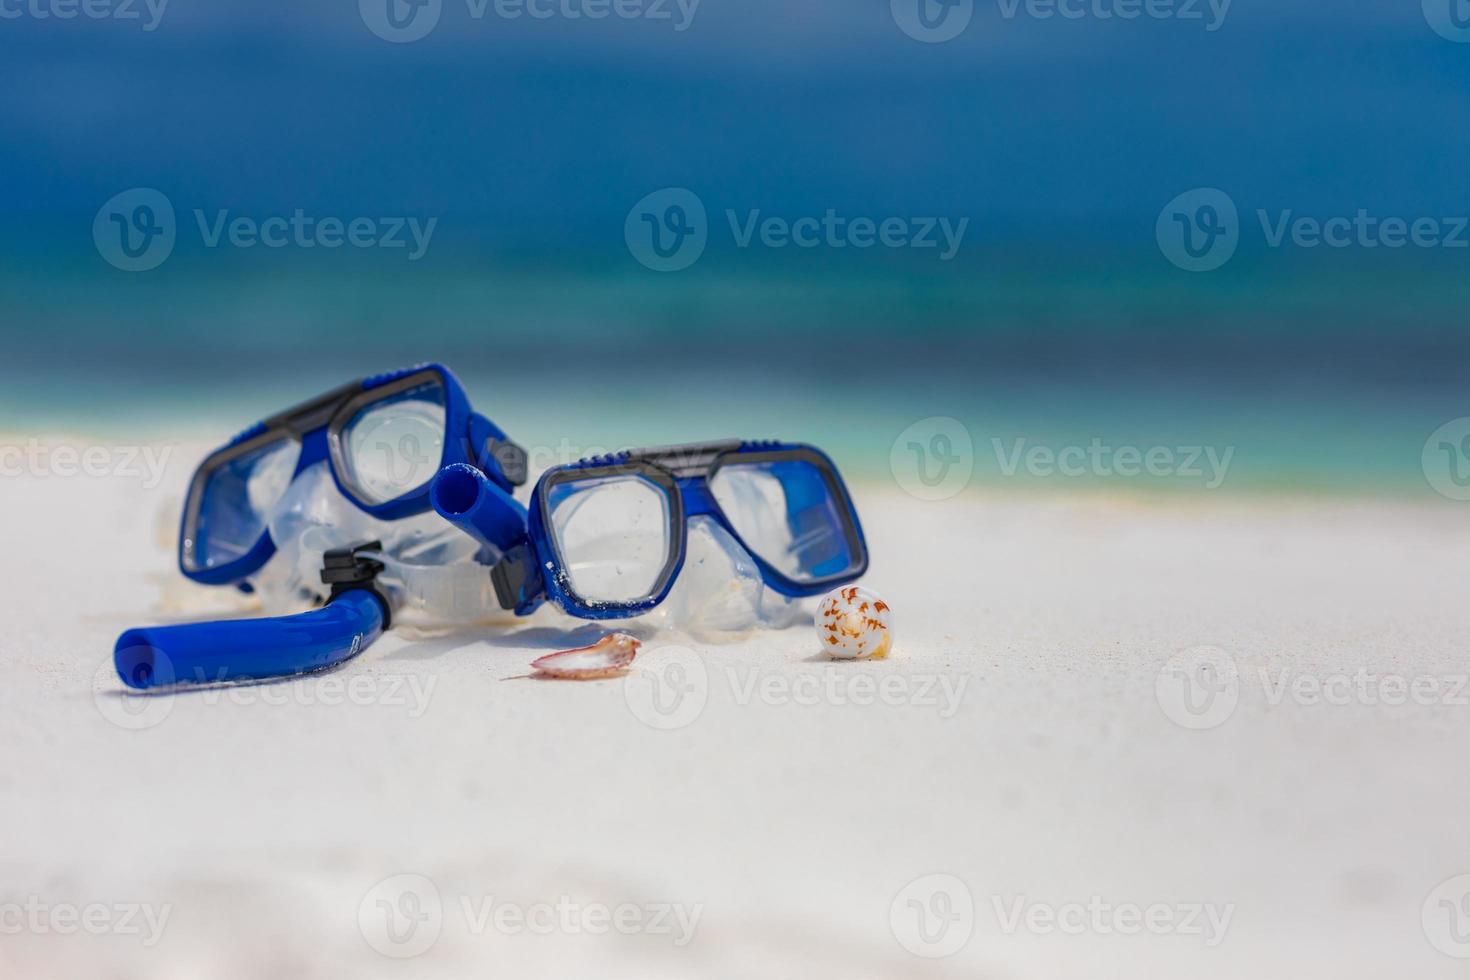 Diving goggles and snorkel gear on sandy beach. Snorkeling water sport and recreational equipment, exotic beach scenery, summer vacation and tourism concept photo